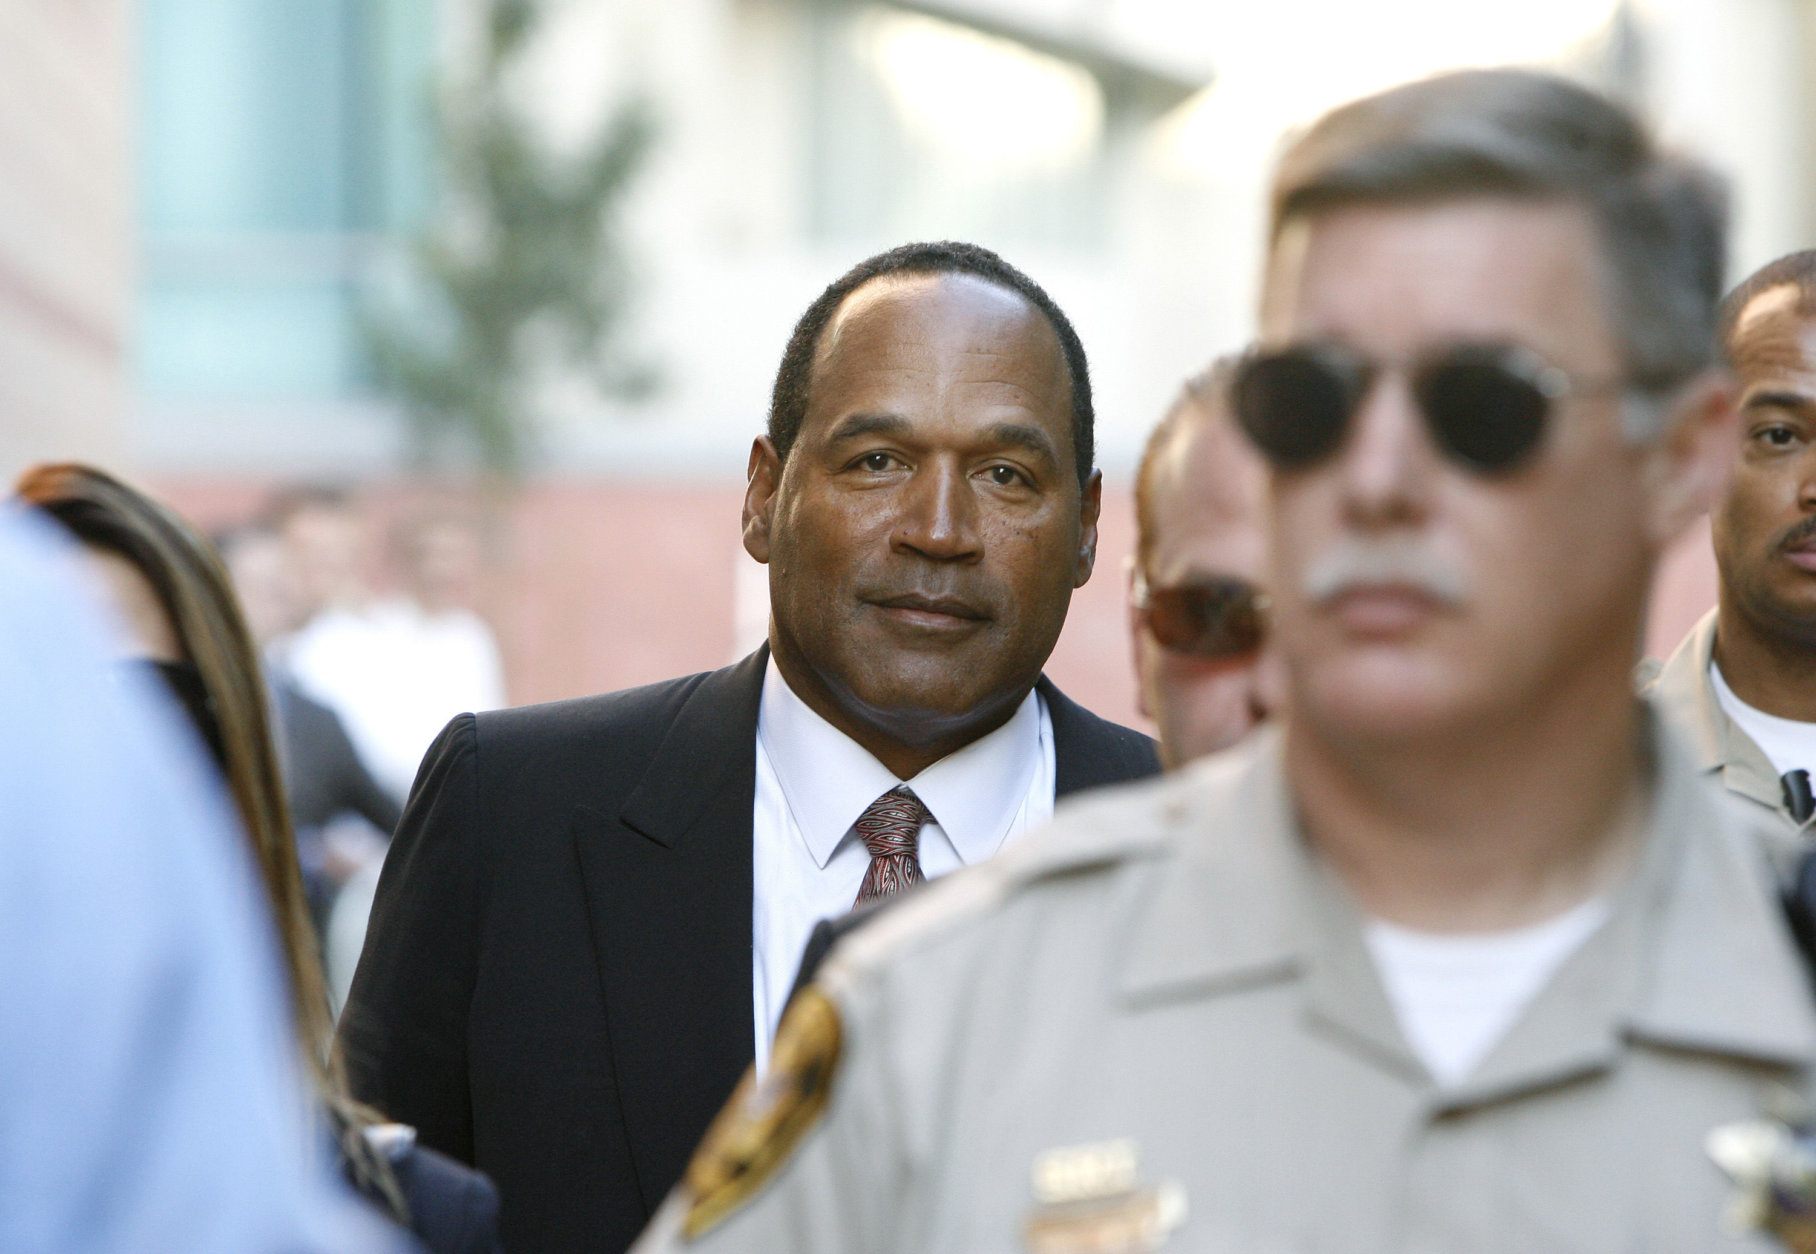 O.J. Simpson arrives at the Clark County Regional Justice Center on the second day of jury selection for his trial in Las Vegas, Tuesday, Sept. 9, 2008. Simpson faces 12 charges, including felony kidnapping, armed robbery and conspiracy. (AP Photo/Isaac Brekken)